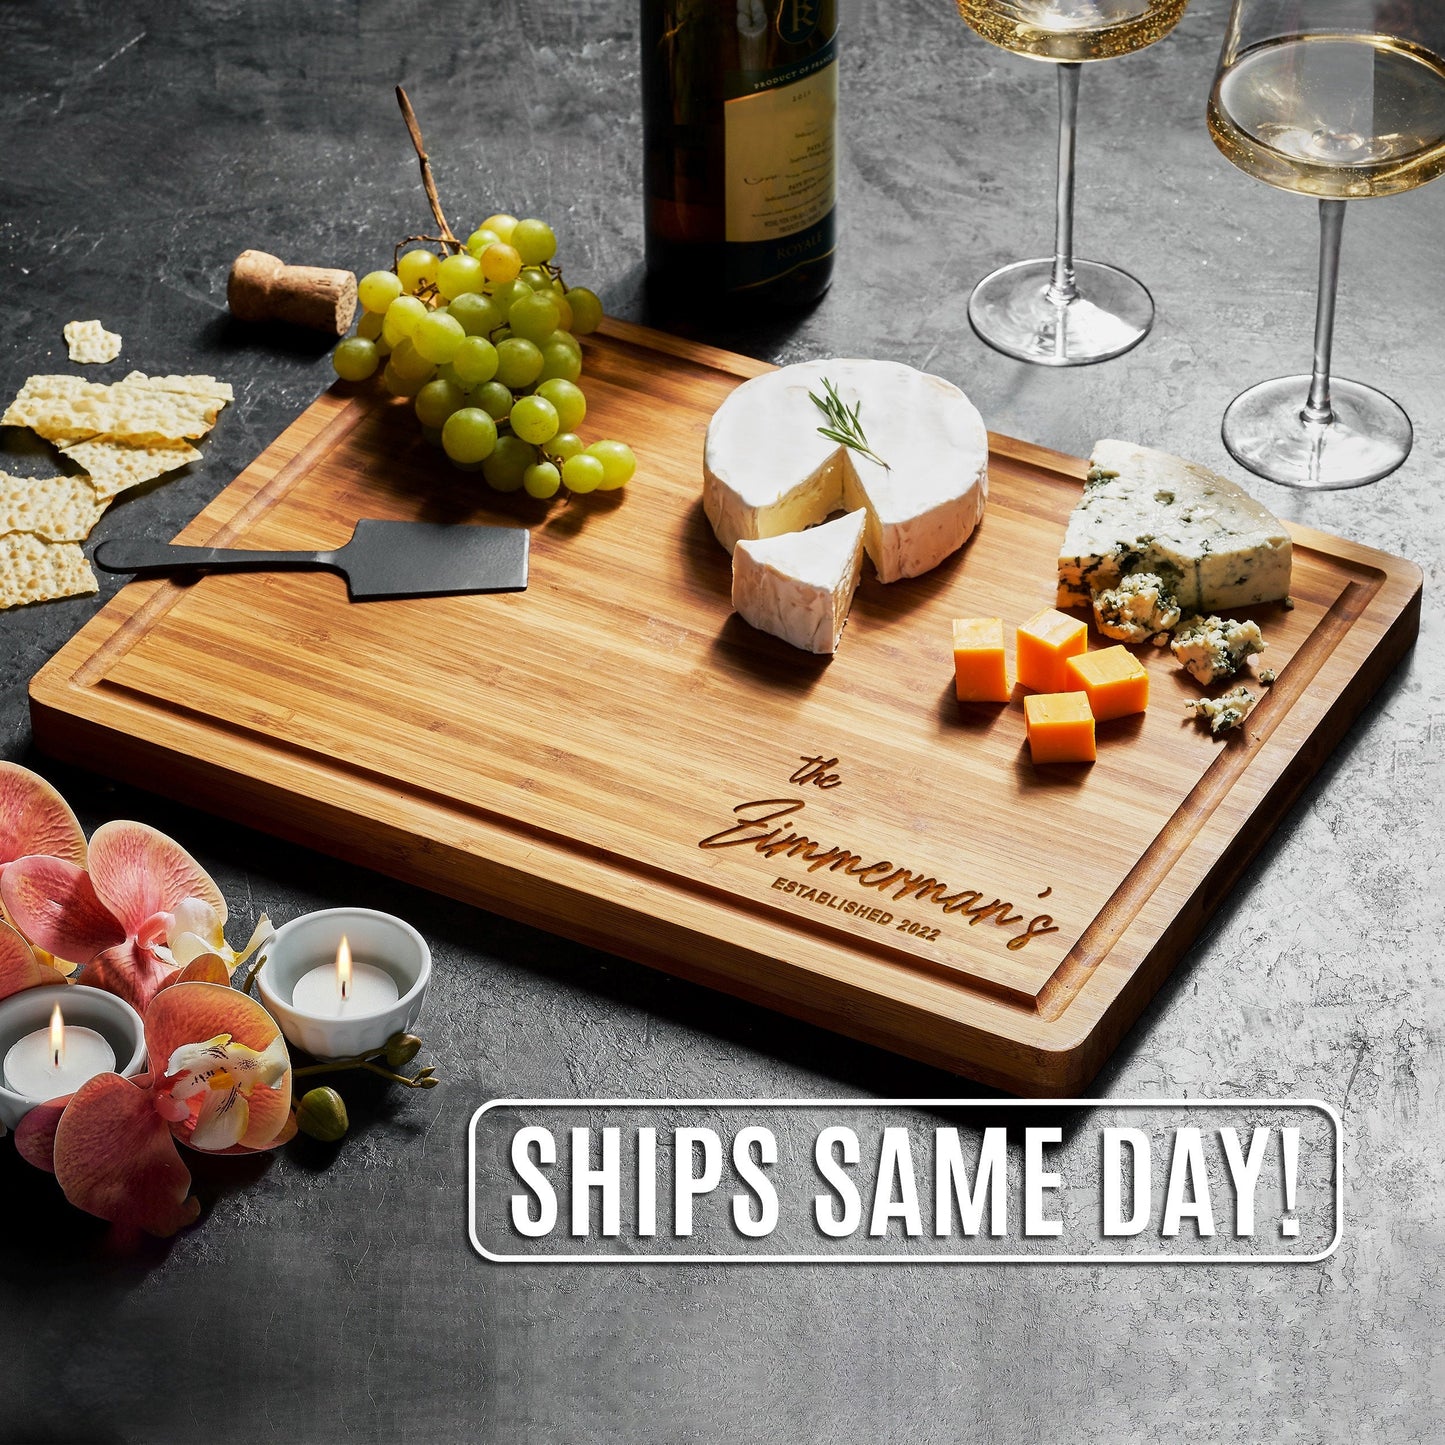 cheeseboard-with-wine,-grapes,-and-the-promise-of-same-day-shipping.